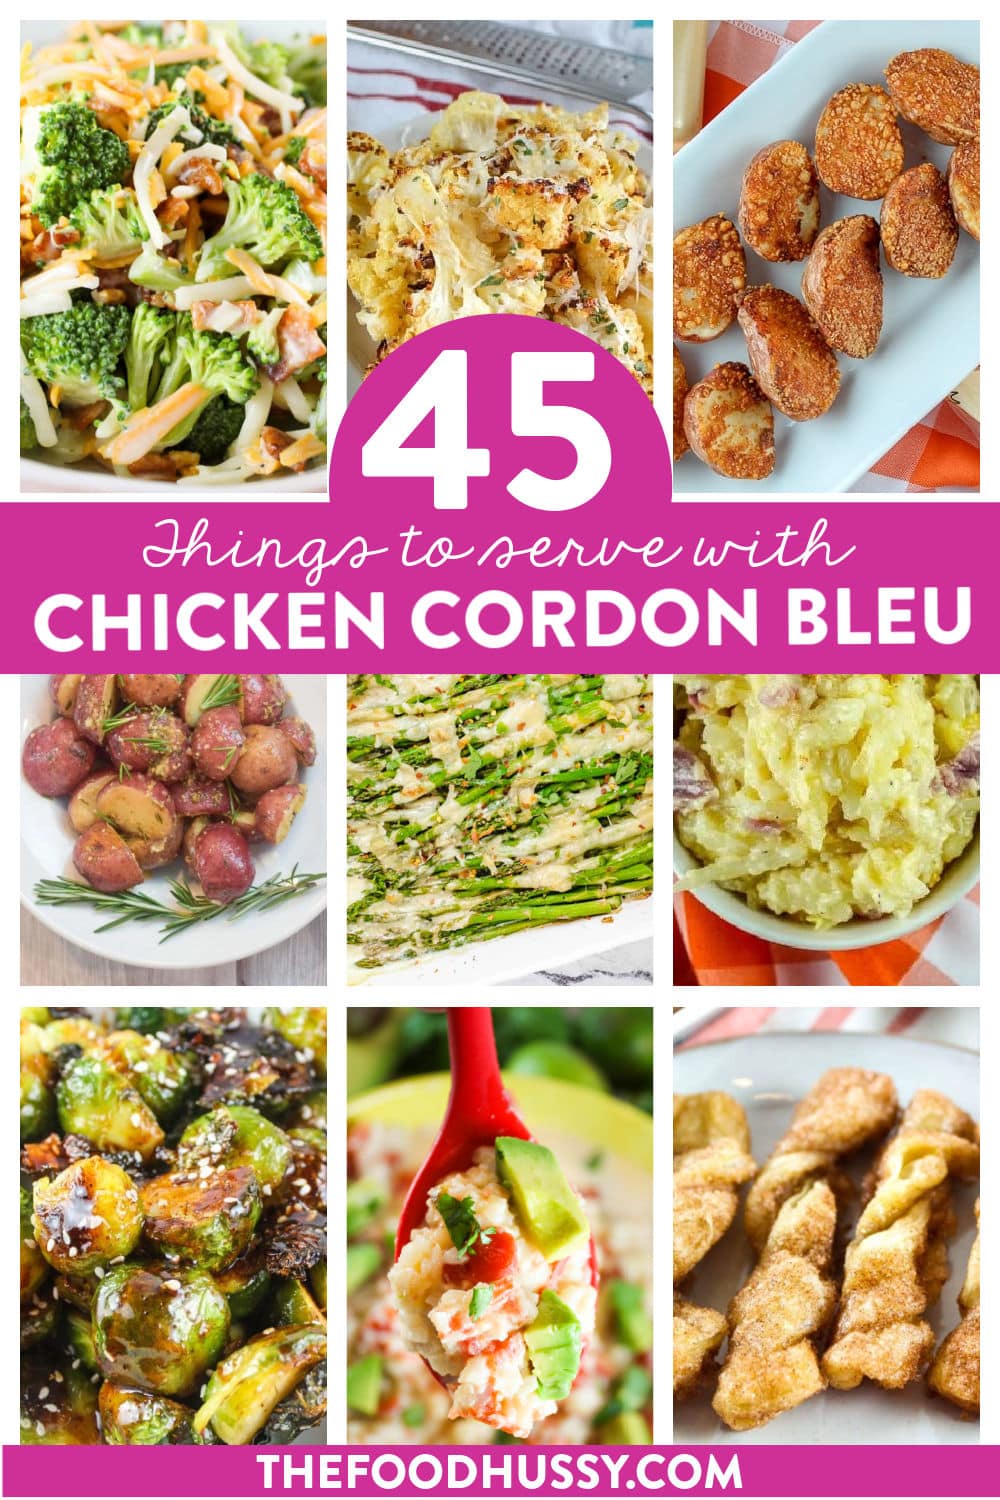 What goes best with Chicken Cordon Bleu? There's chicken, ham and cheese - but where do you go from there? I've got 45 side dish recipes that are a perfect fit for Chicken Cordon Bleu including salads, carbs and veggies!  via @foodhussy